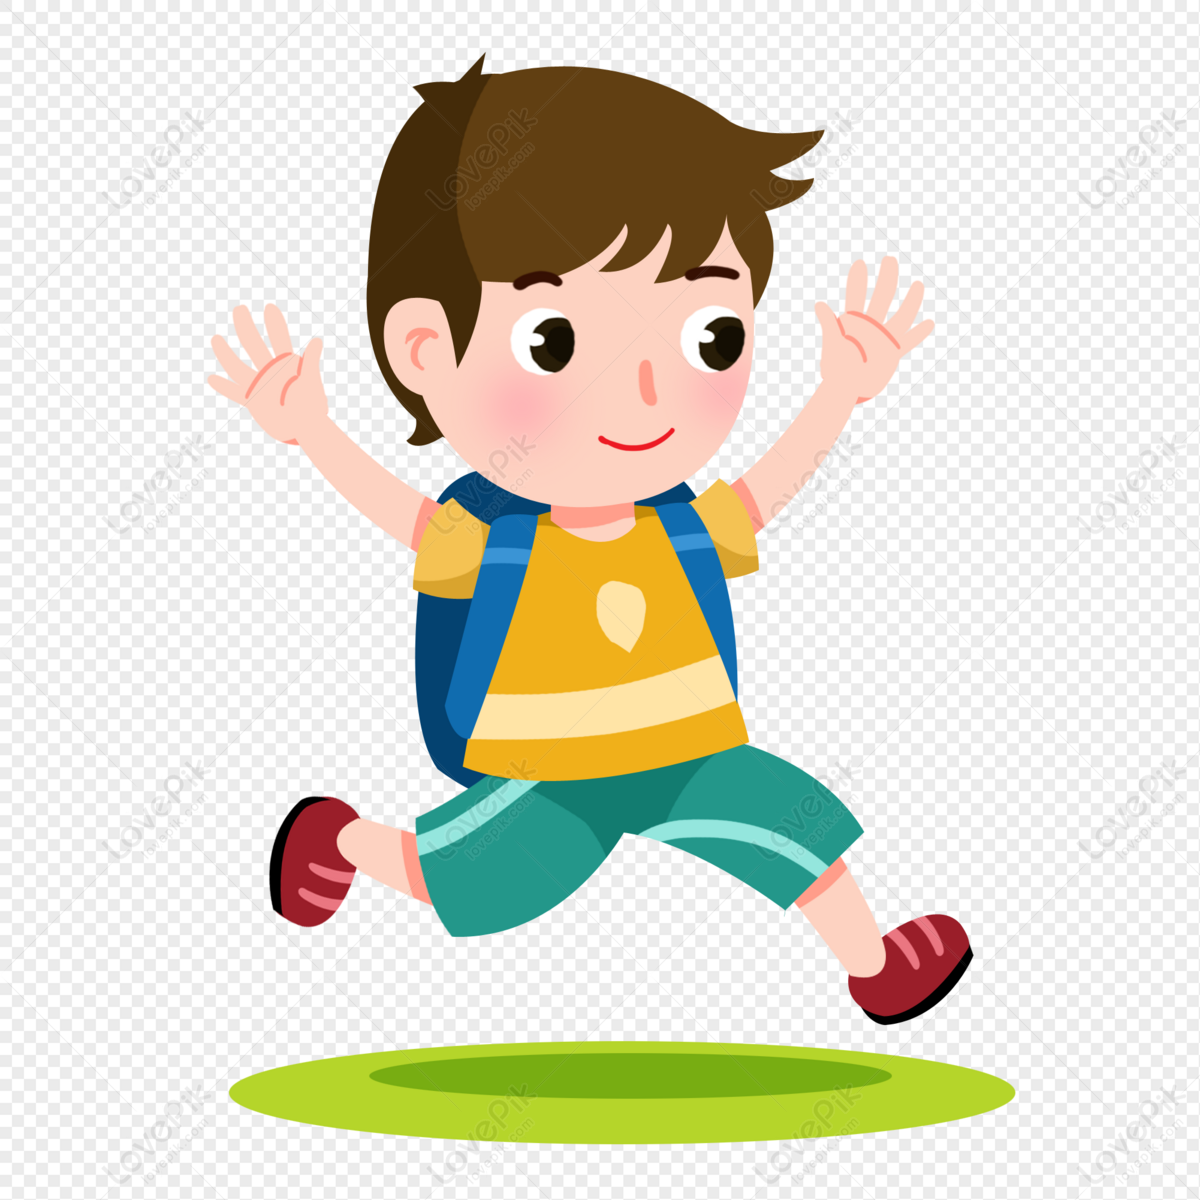 Cartoon Boy Running With A Bag PNG Transparent Image And Clipart Image For  Free Download - Lovepik | 401272317